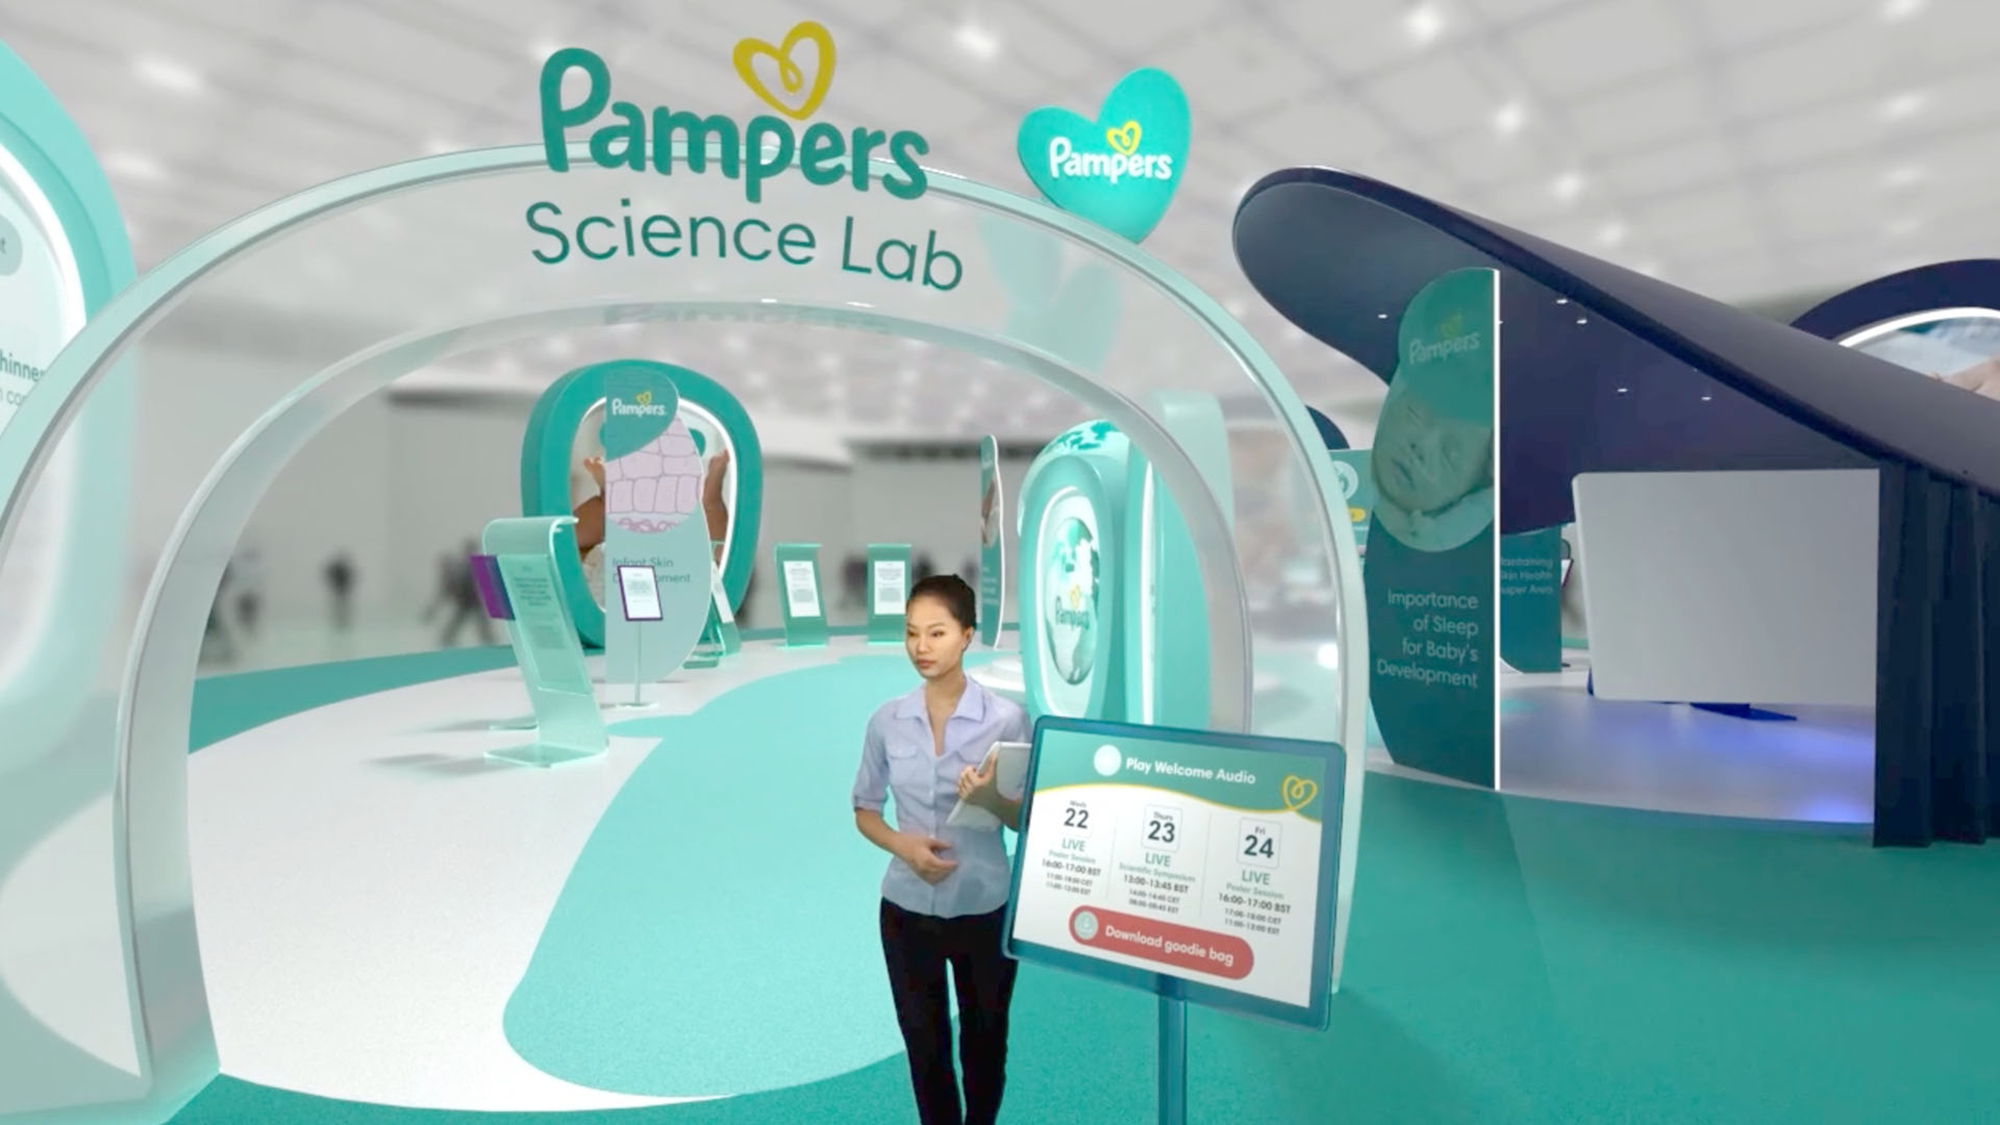 Pampers 3d rendered display with a person ready to welcome you.